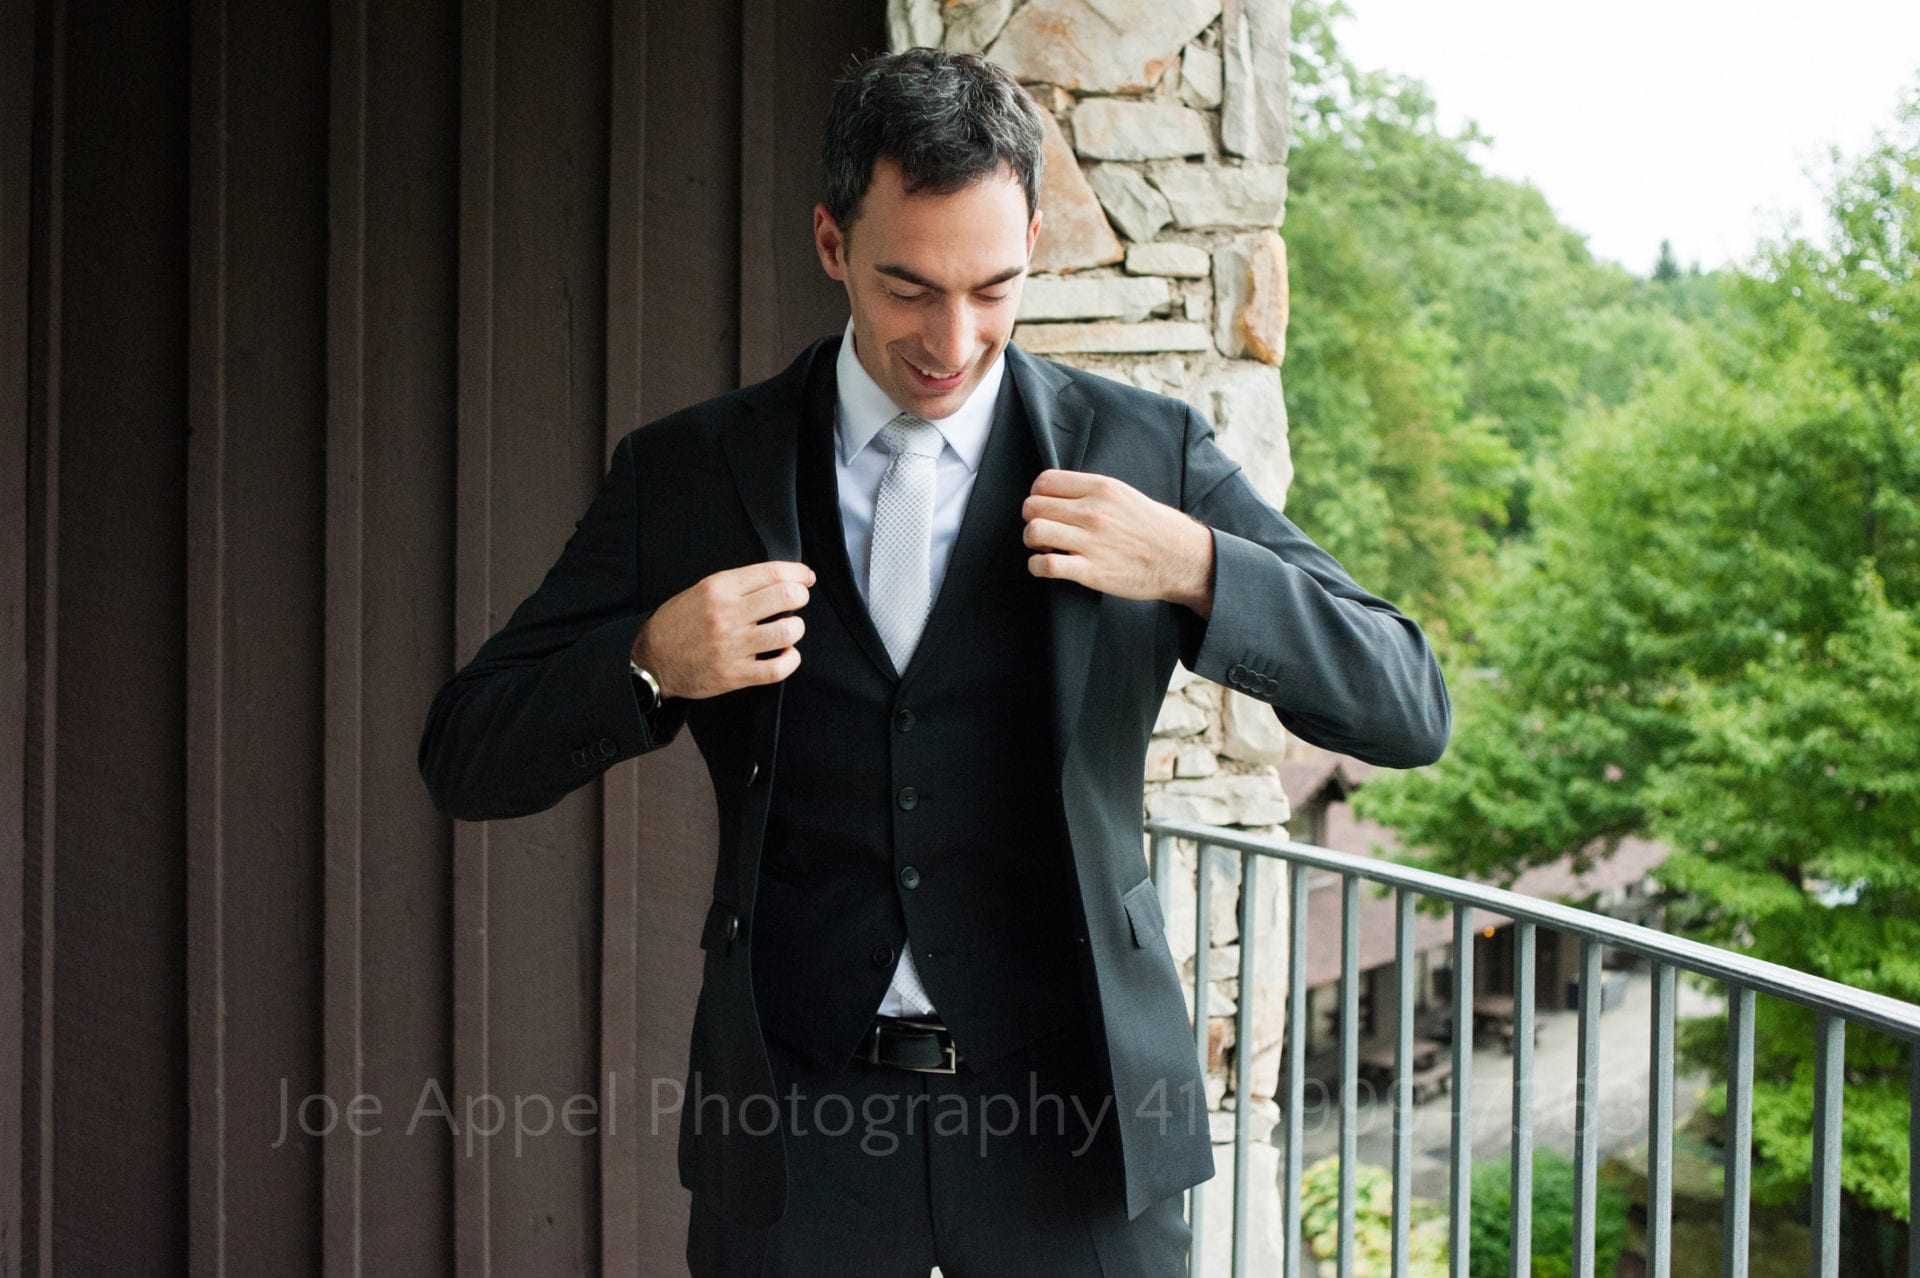 A groom puts on his jacket as he stands on a balcony made of stone and wood.